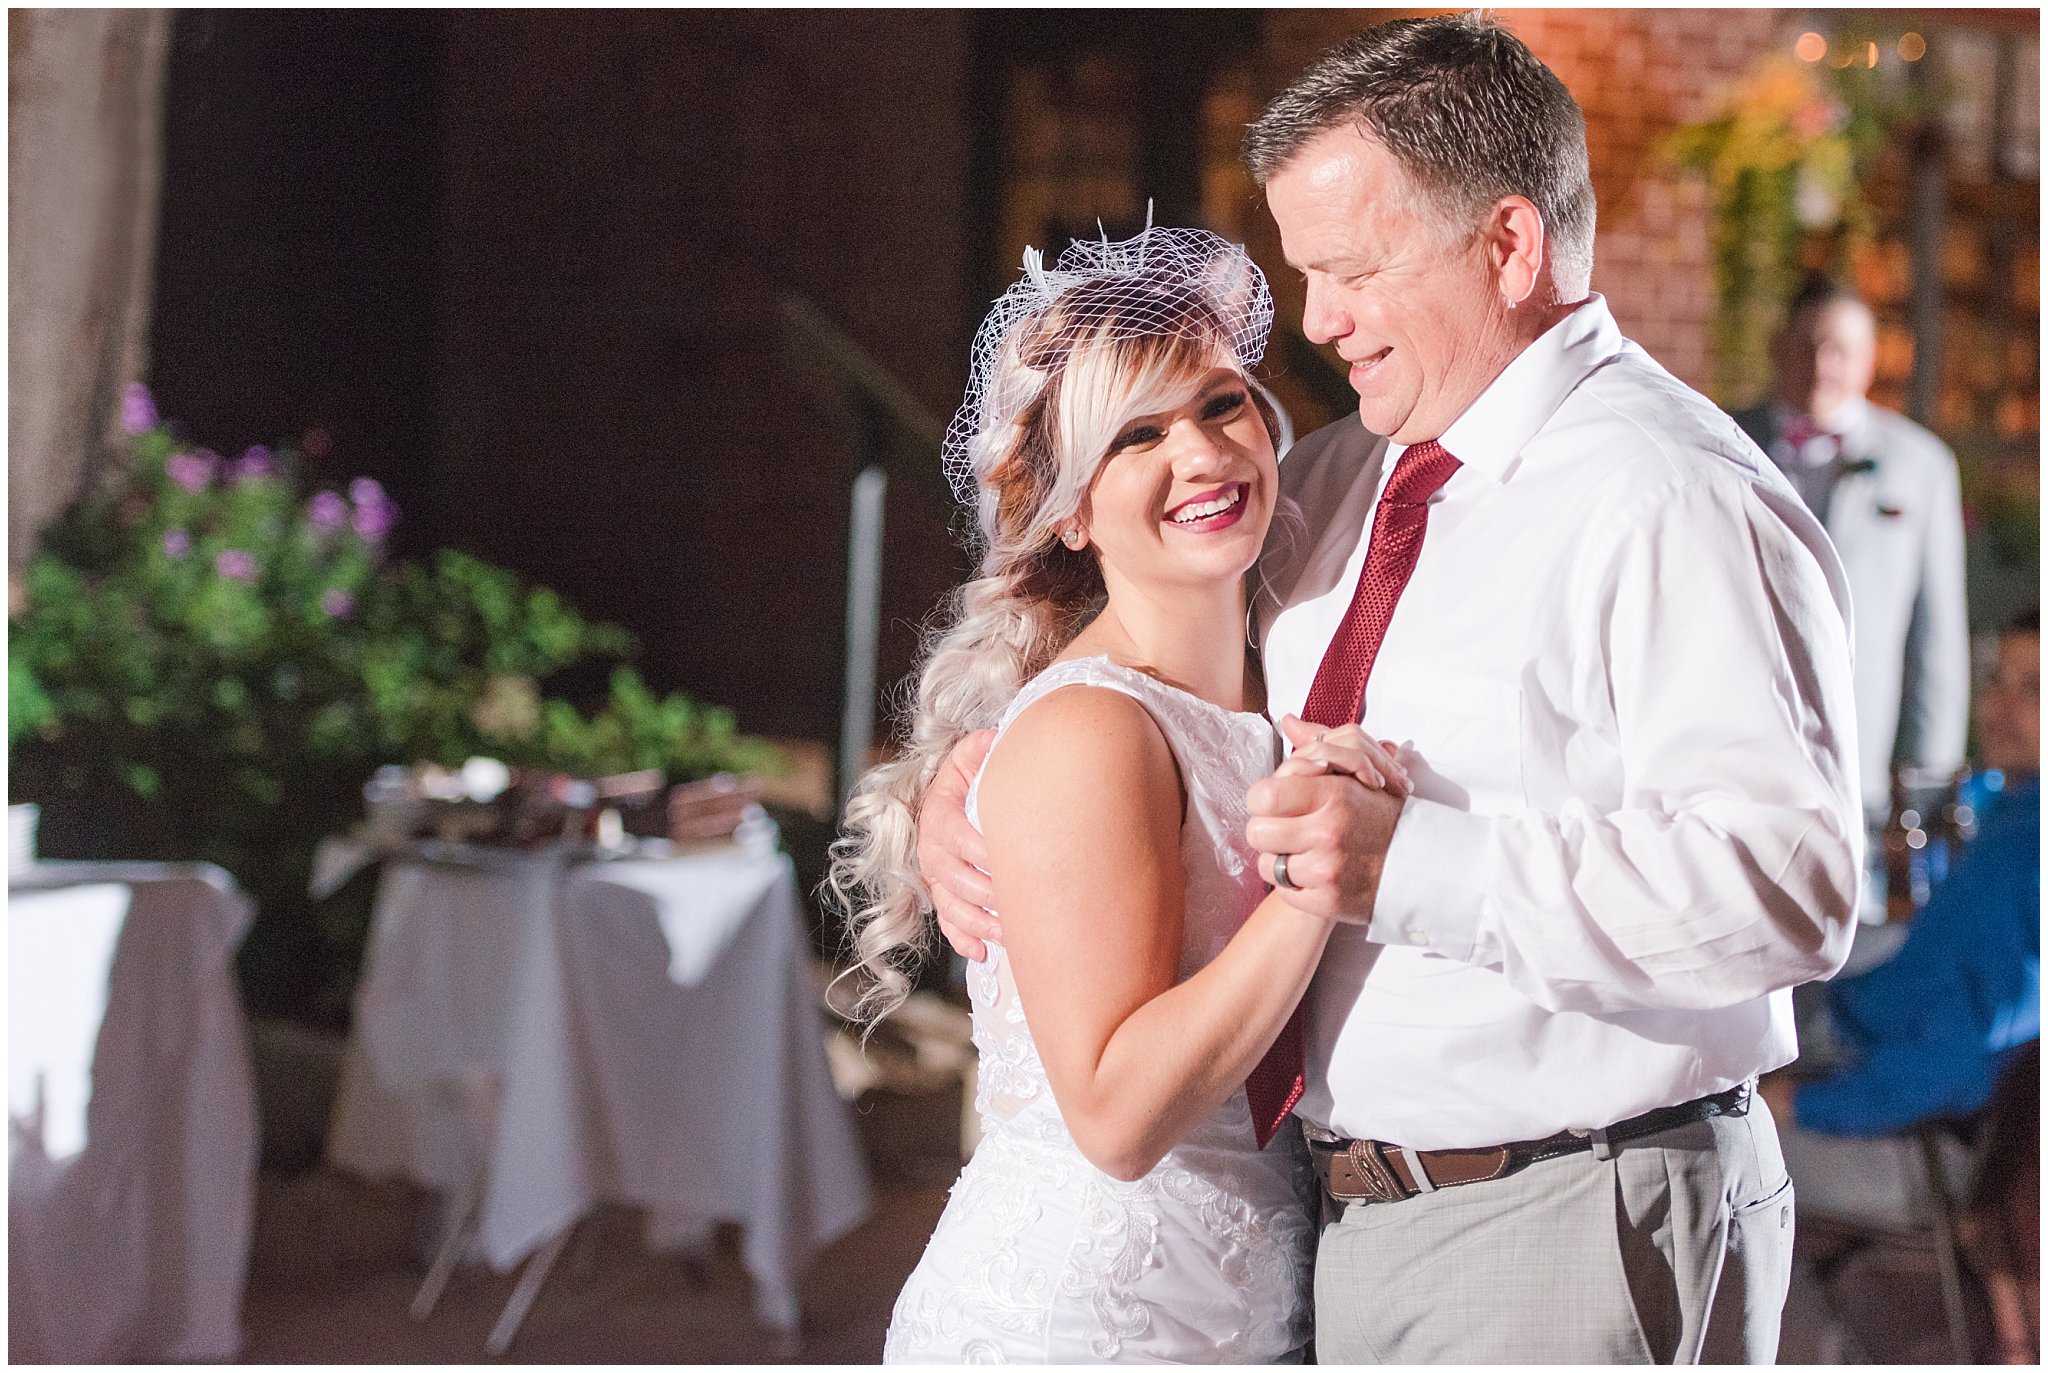 Daddy Daughter dance during wedding reception | Log Haven Summer Mountain Wedding | Jessie and Dallin Photography